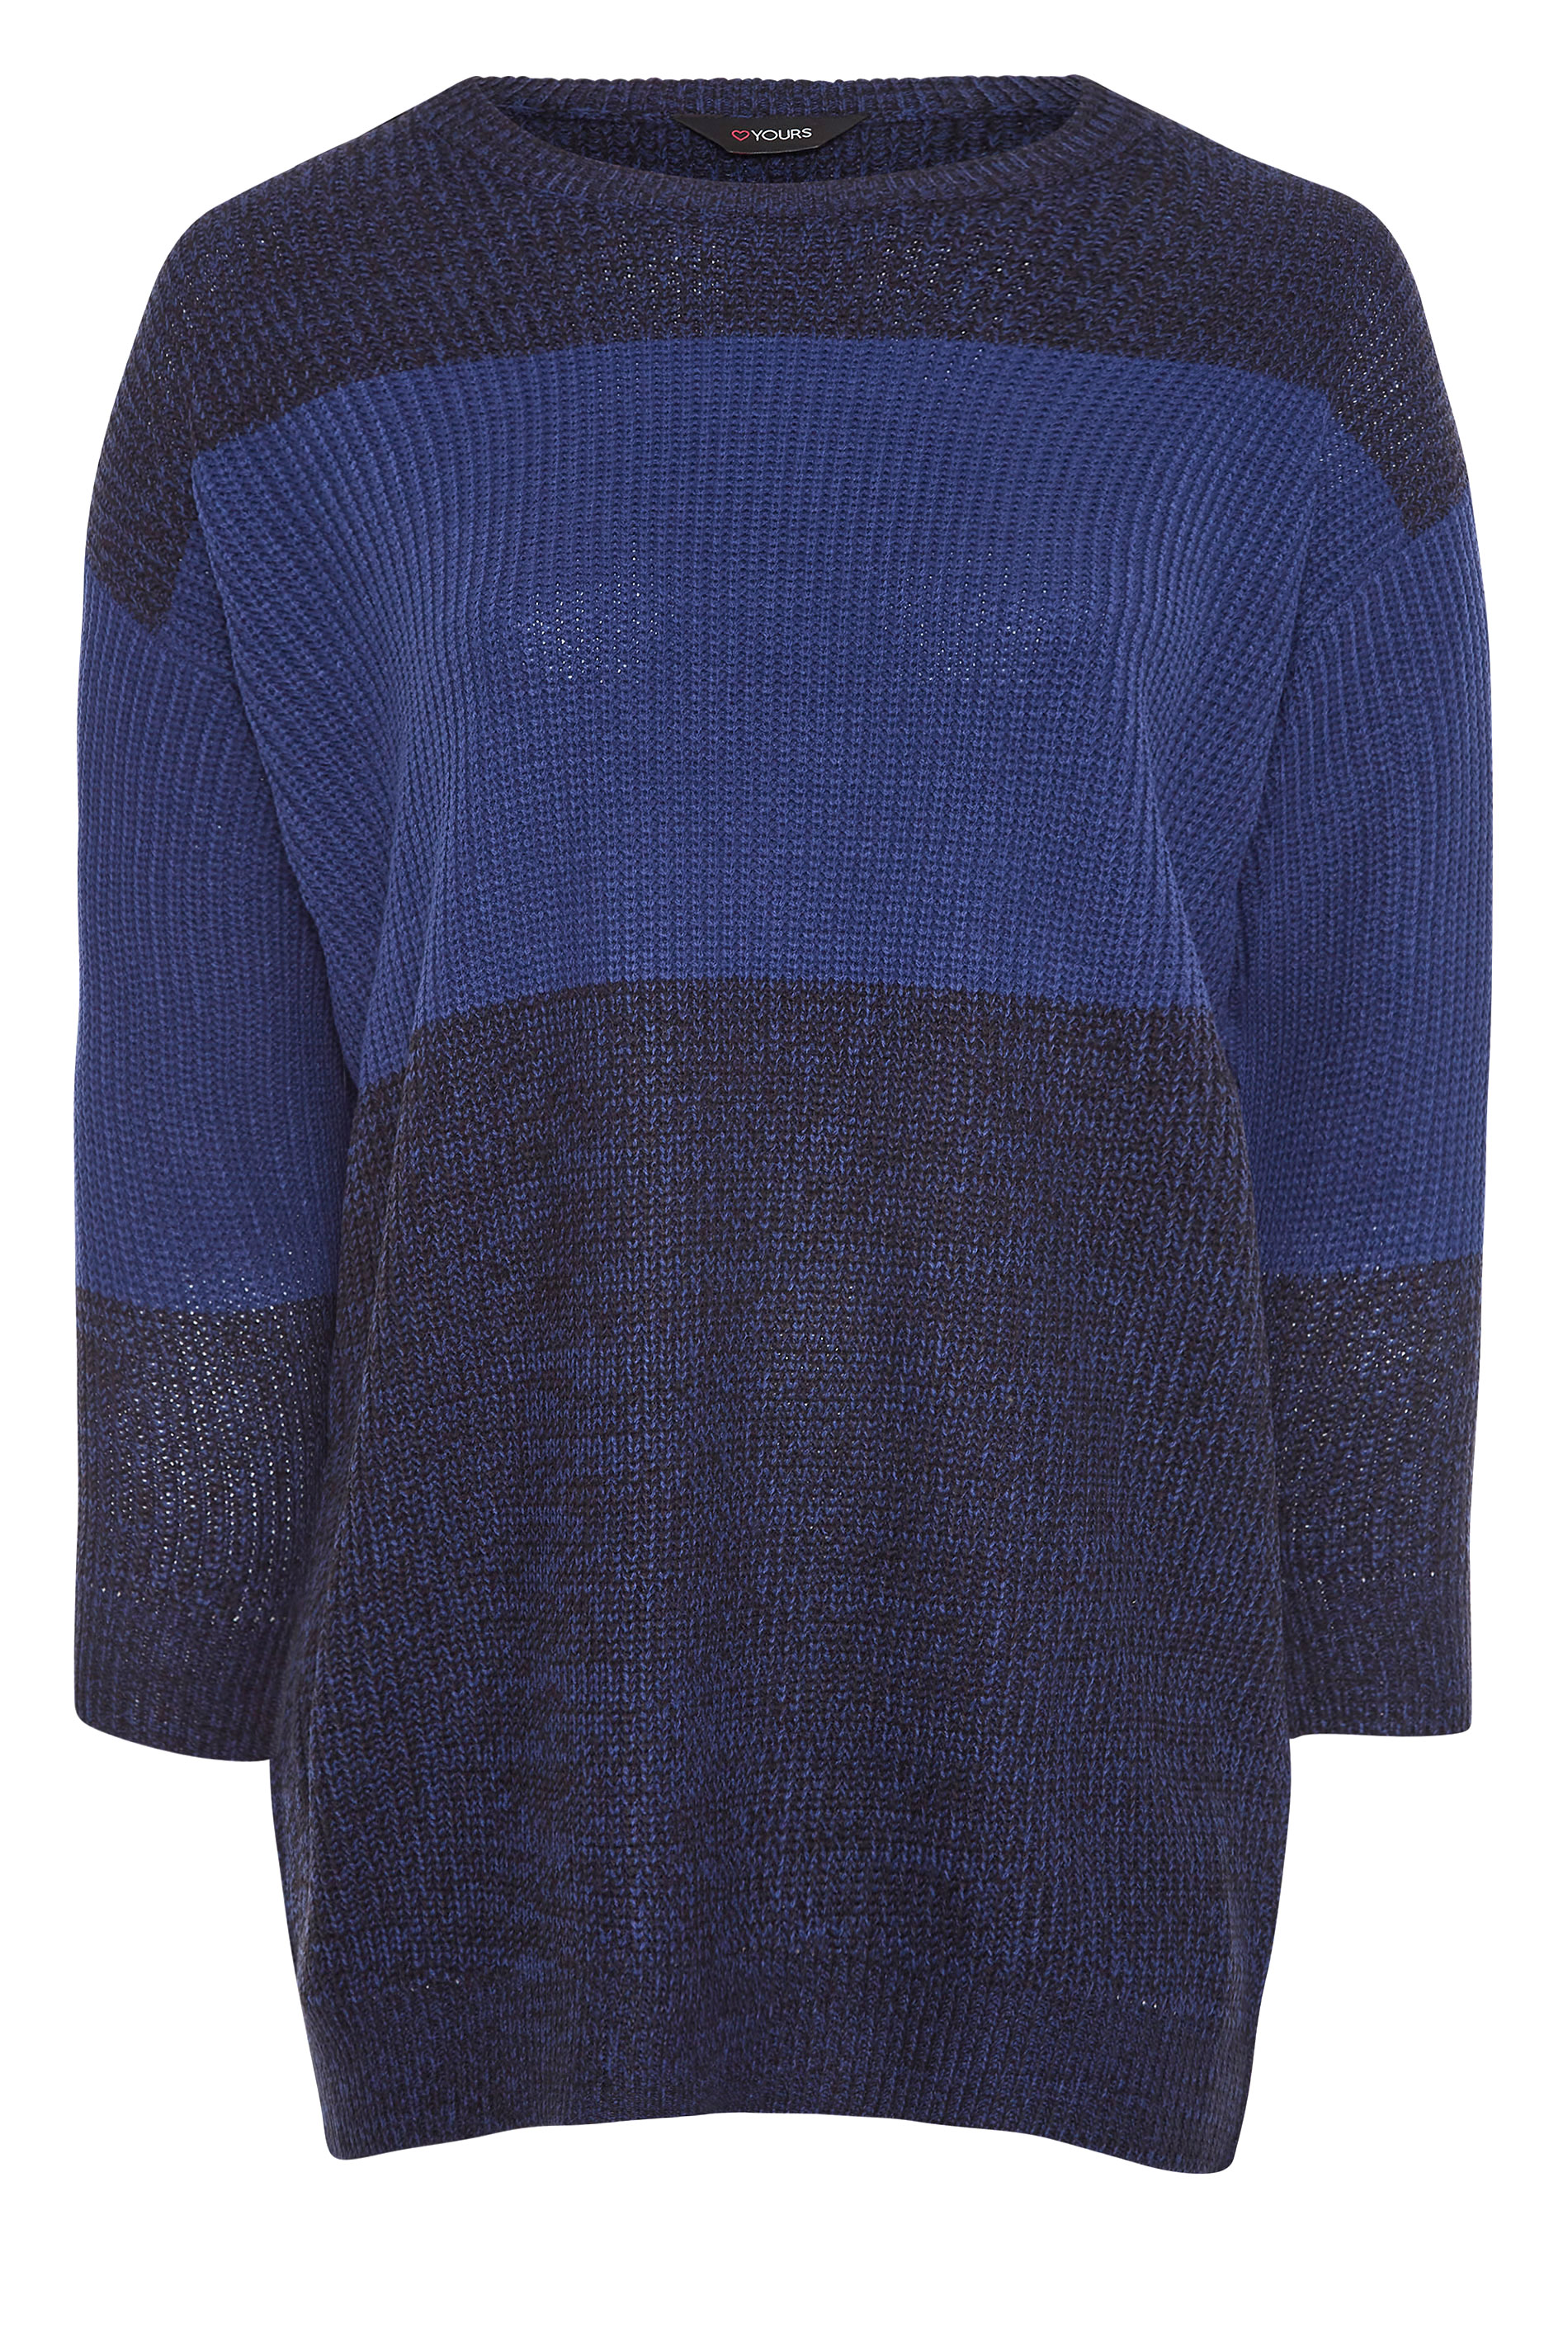 Plus Size Blue Colour Block Knitted Jumper | Yours Clothing